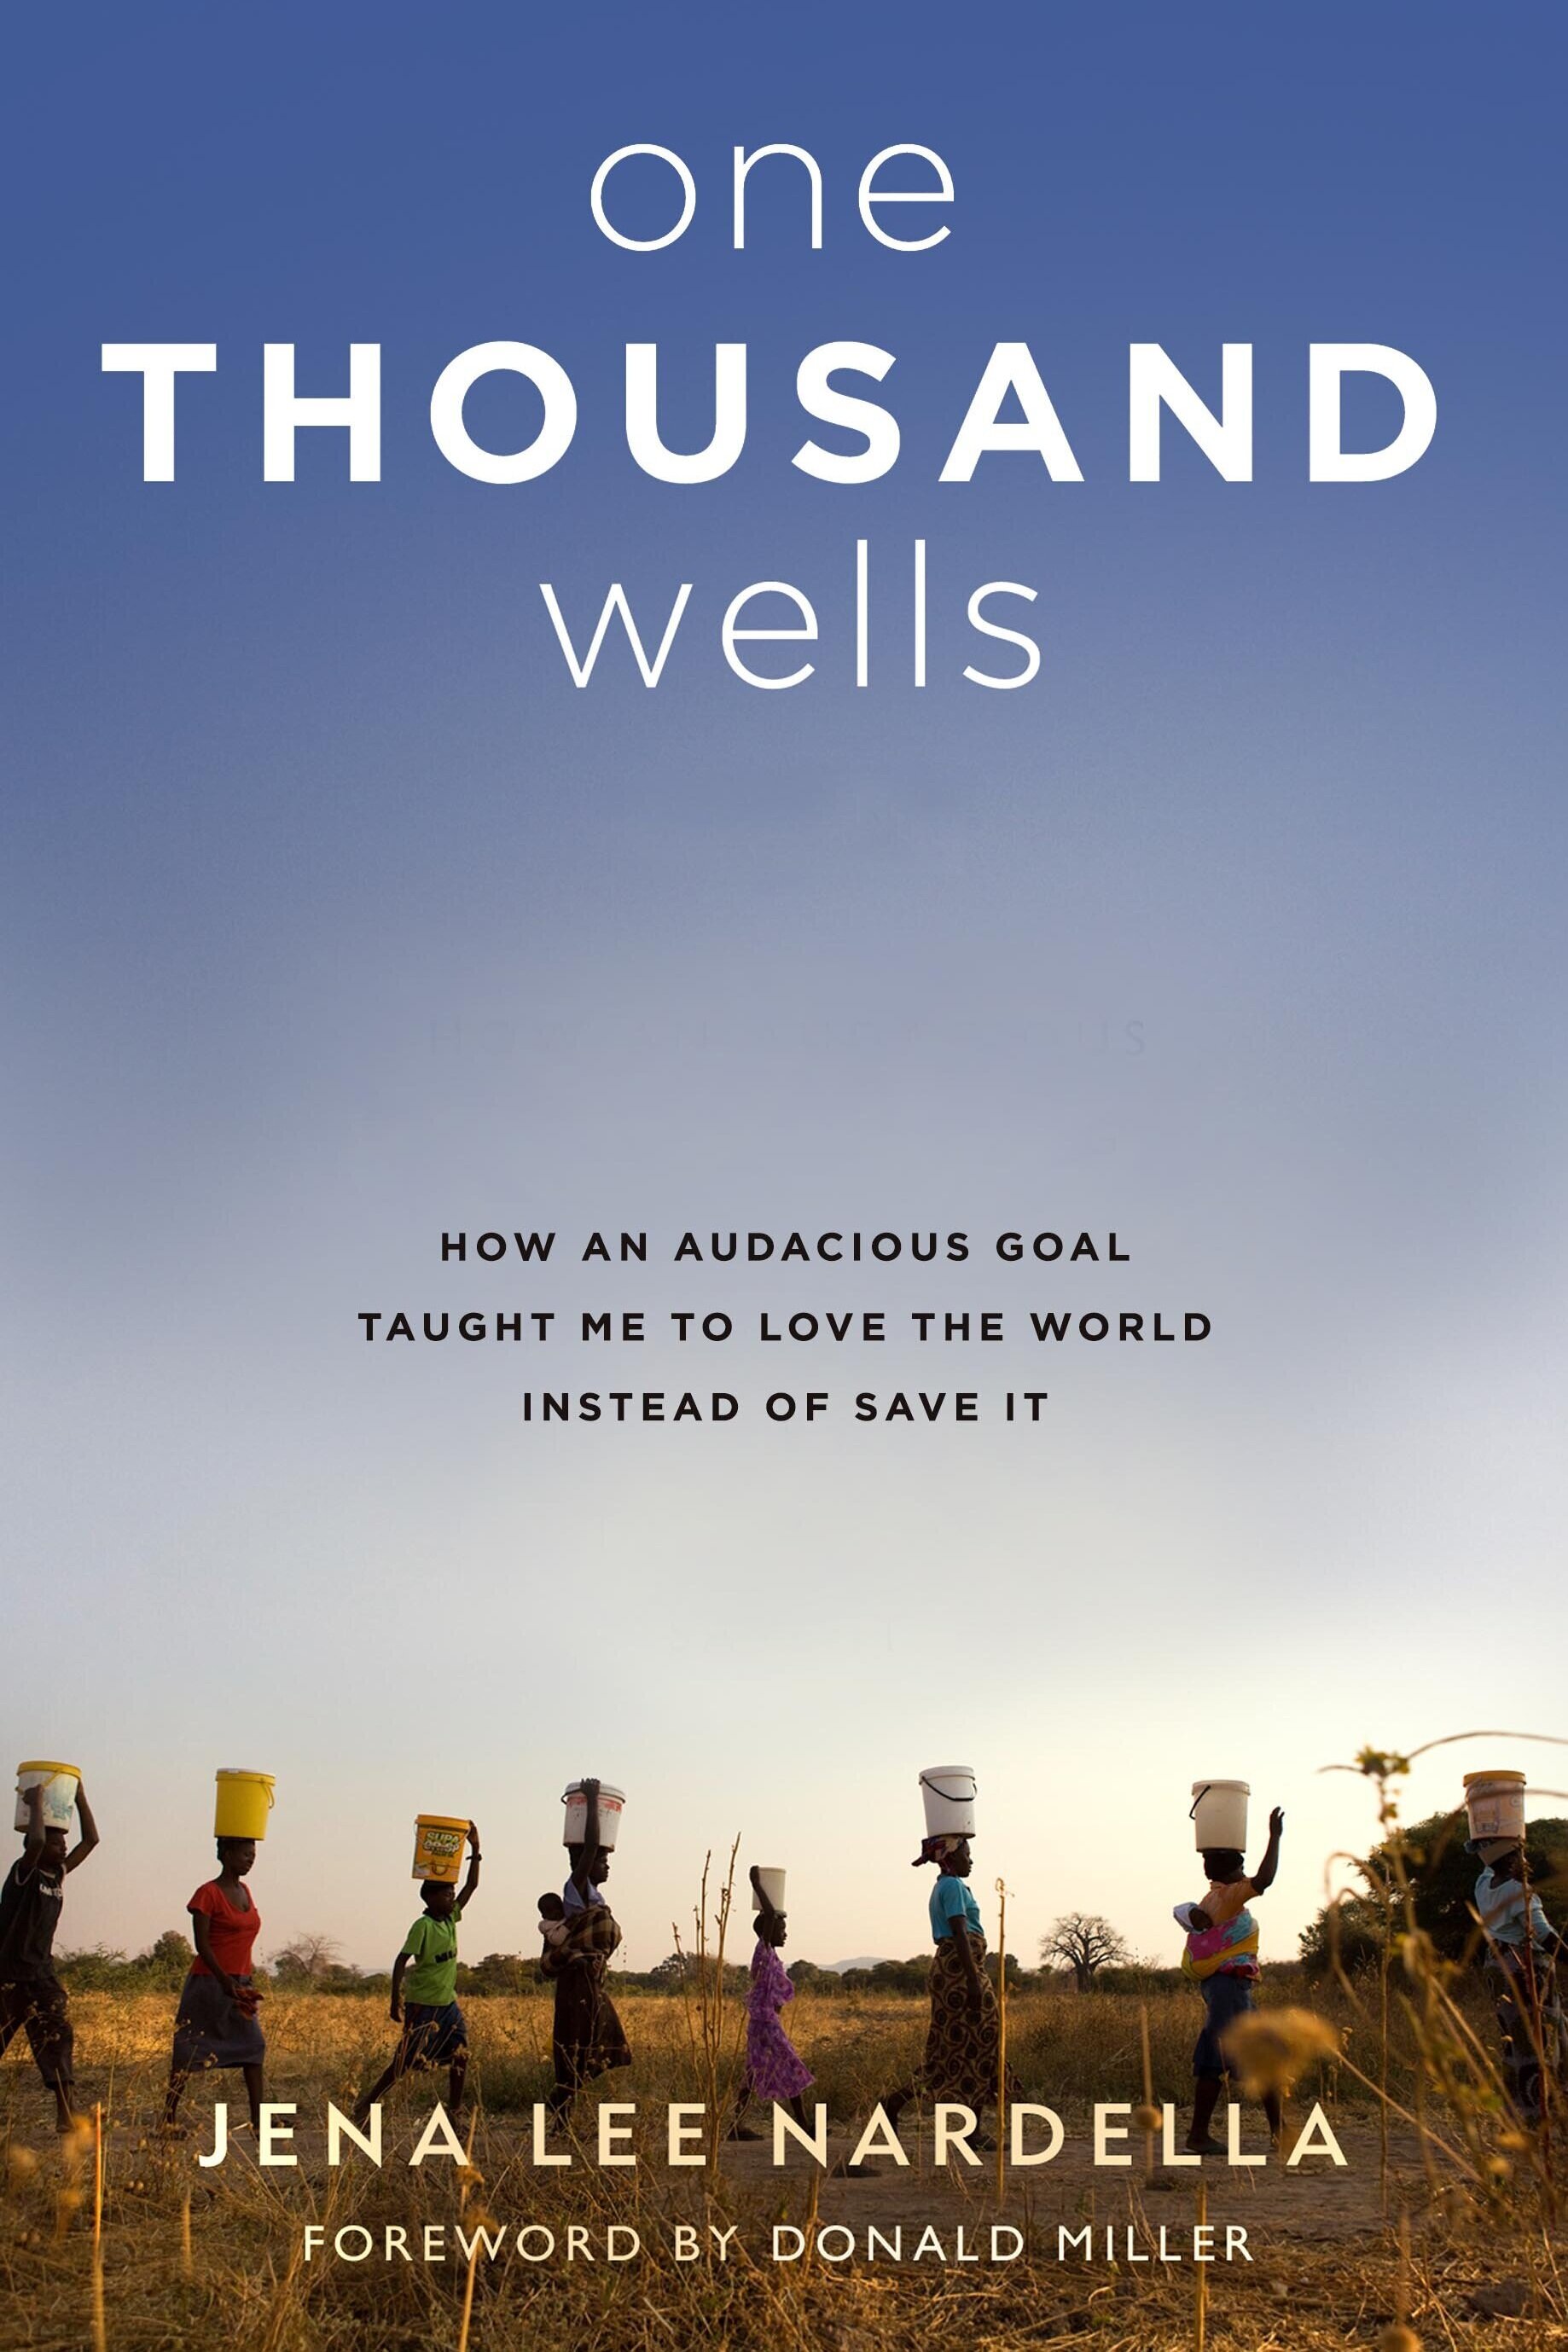 One Thousand Wells book cover